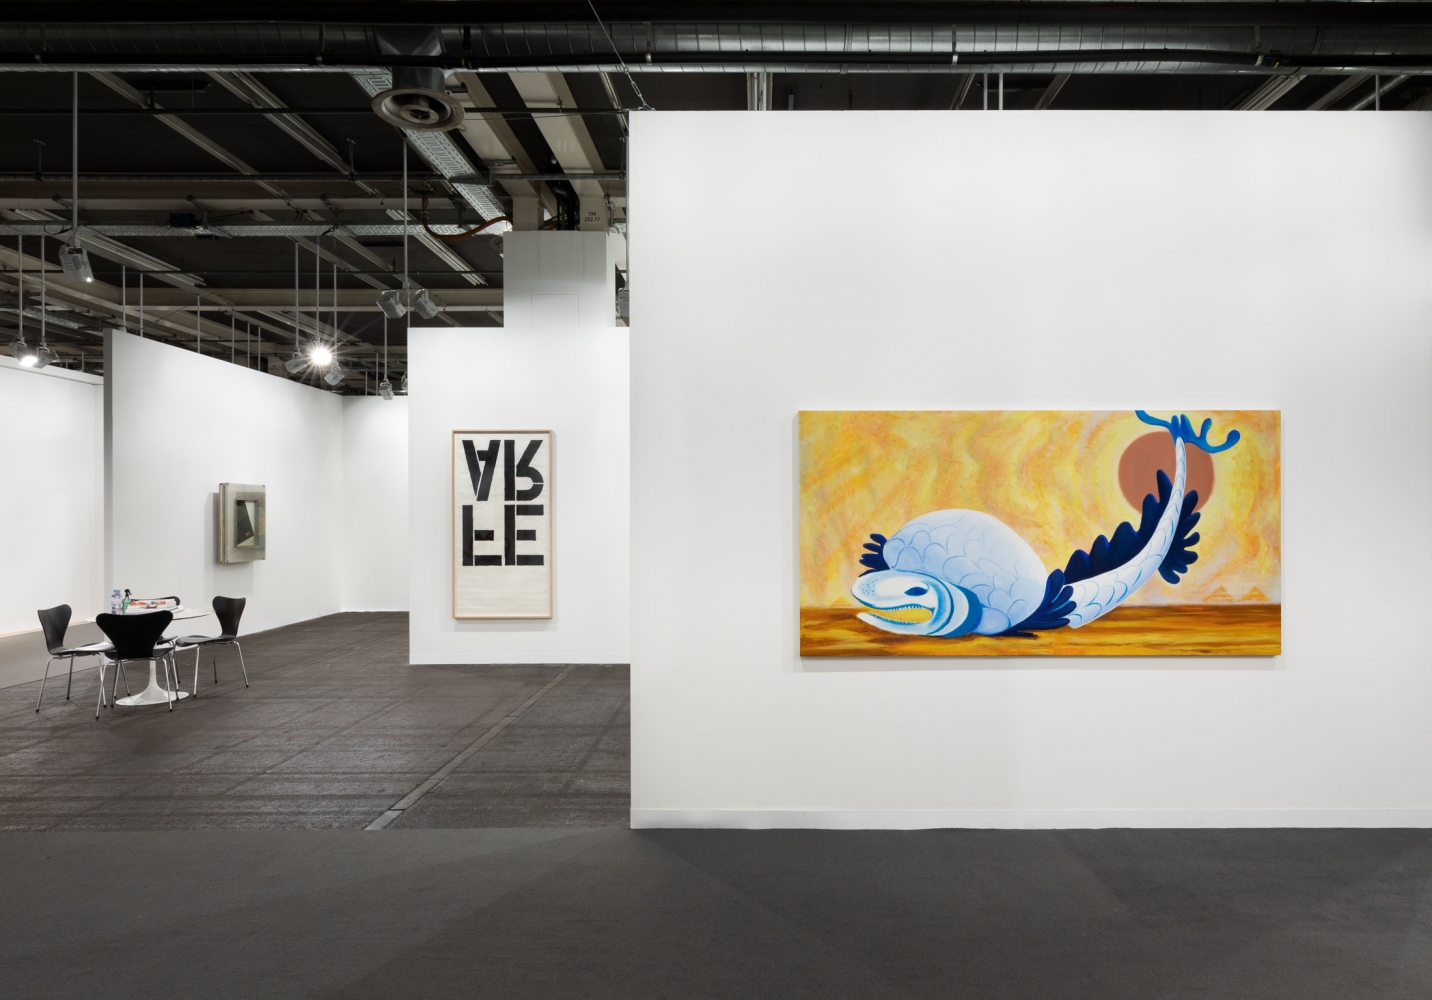 Luhring Augustine
Art Basel, Booth A2
Installation view
​2021
Photo: Dawn Blackman